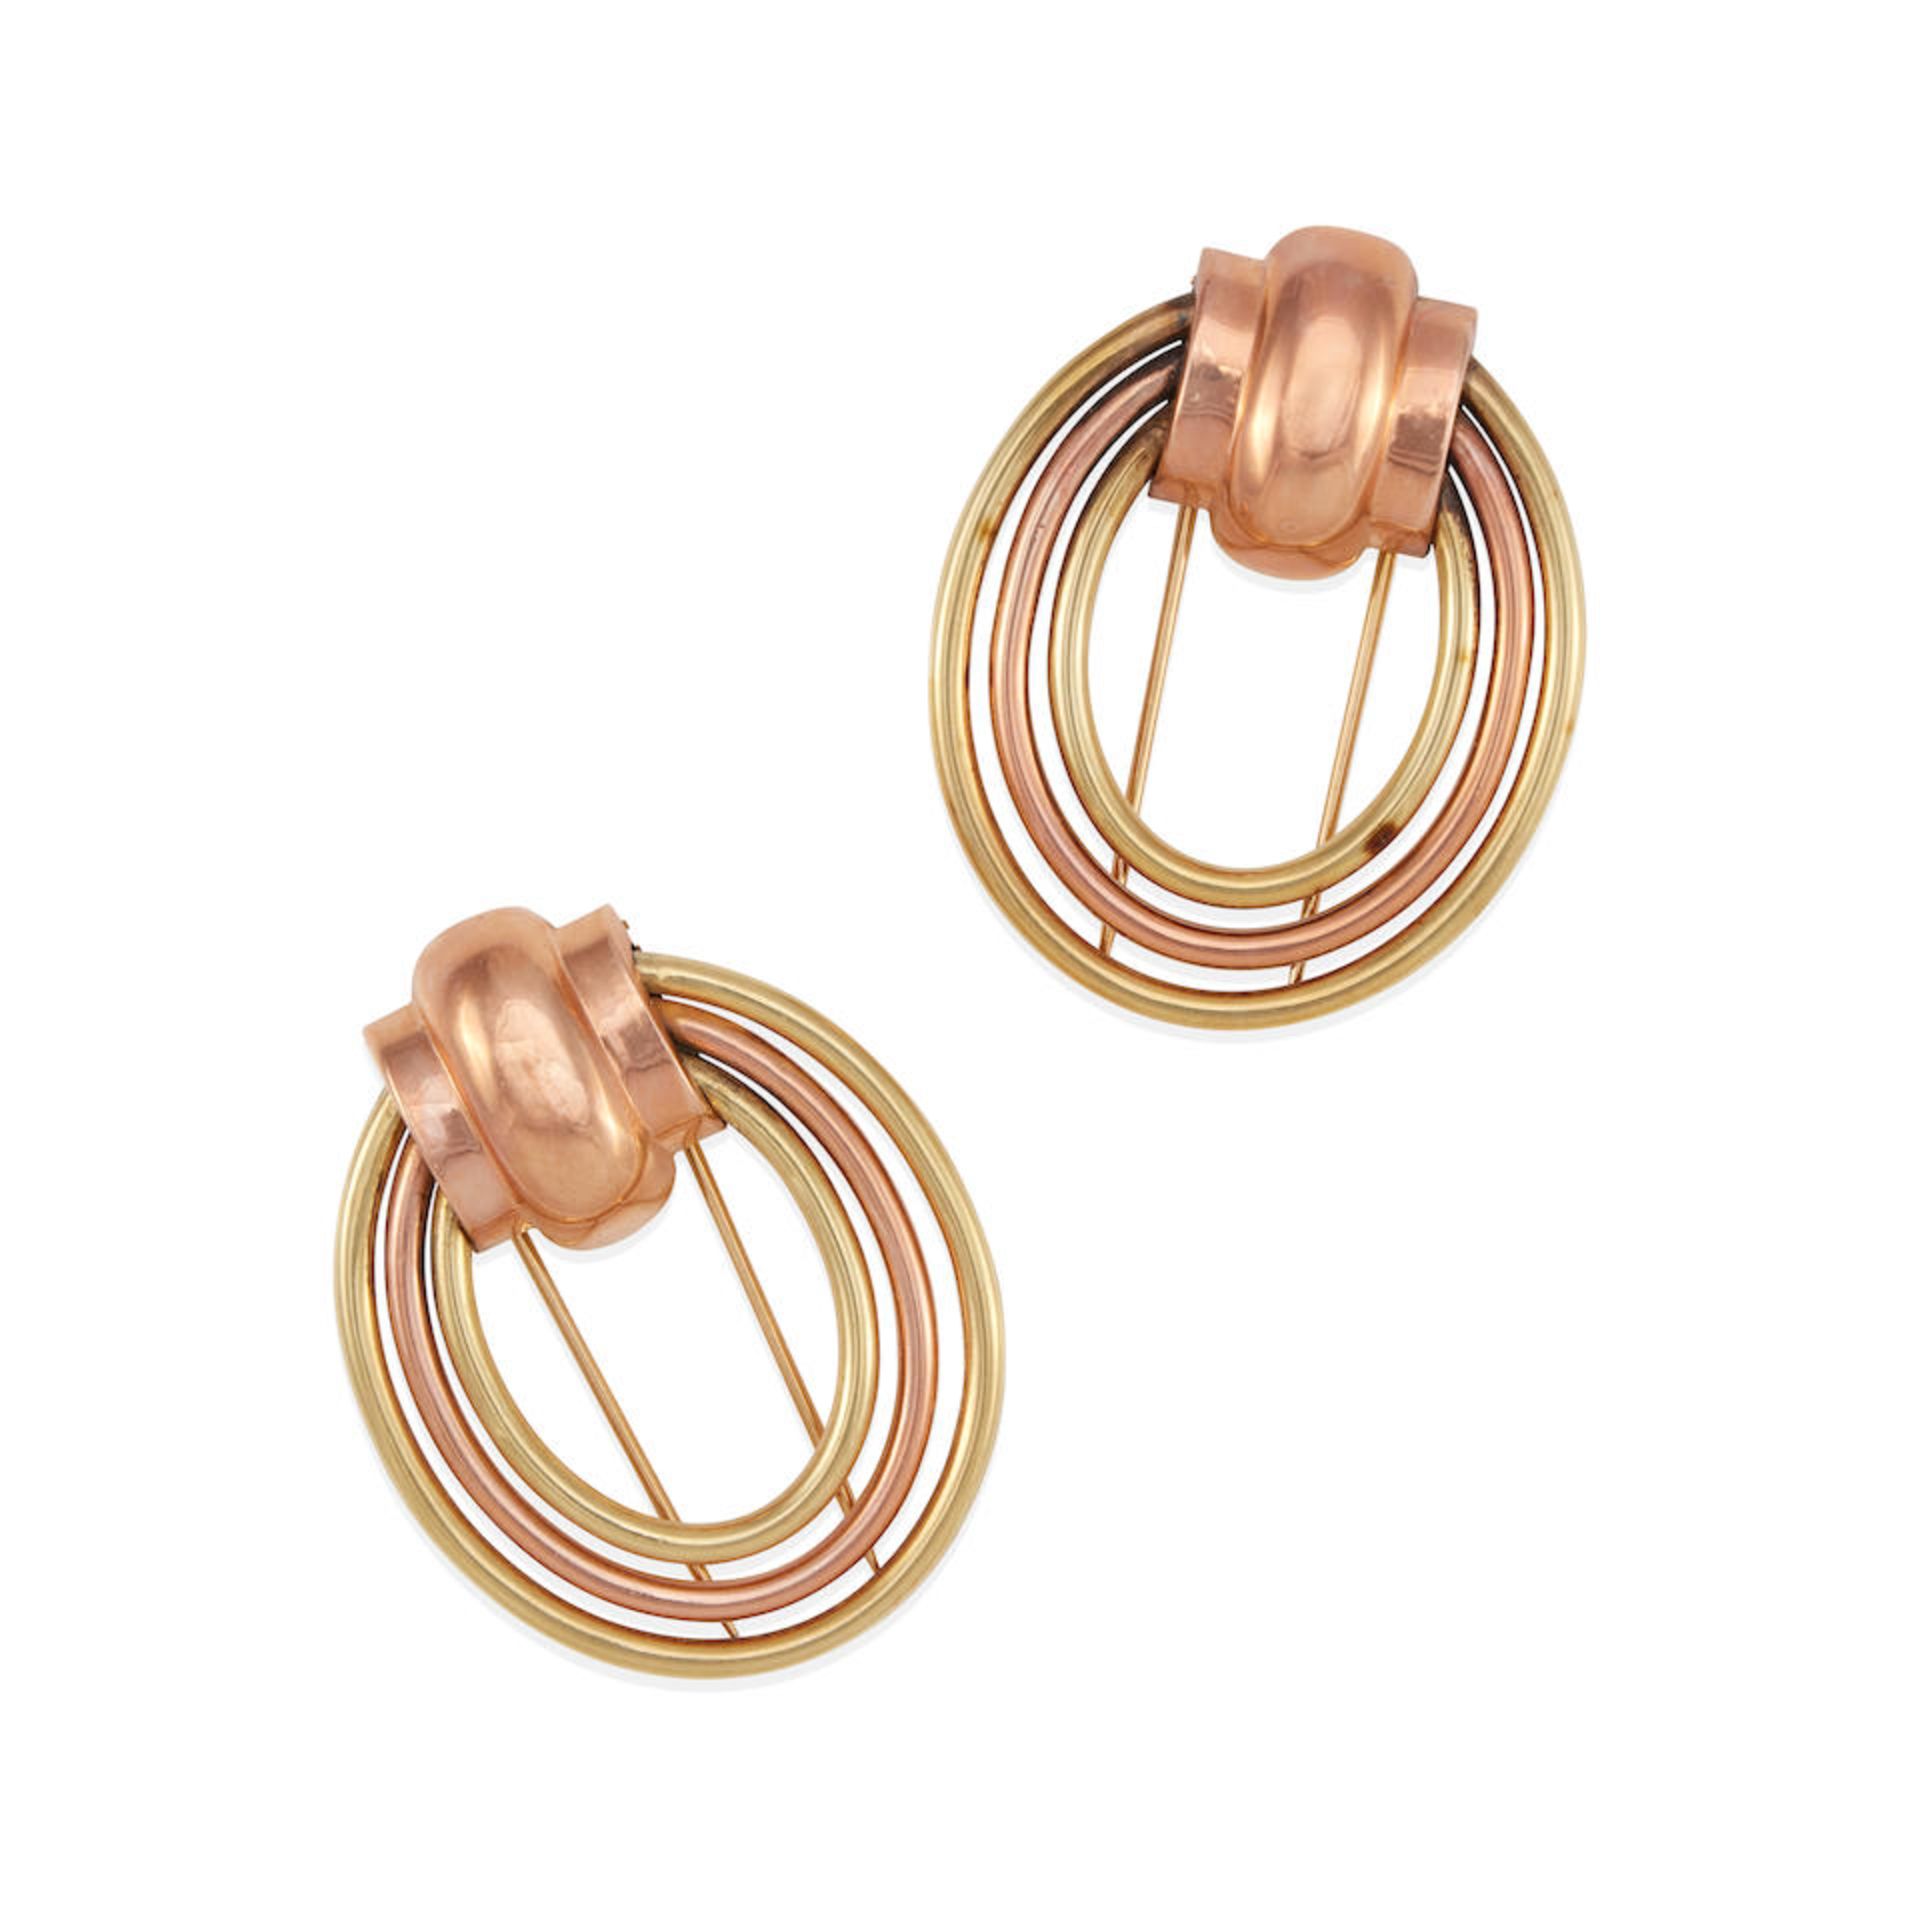 A PAIR OF 14K BI-COLOR GOLD CLIP BROOCHES